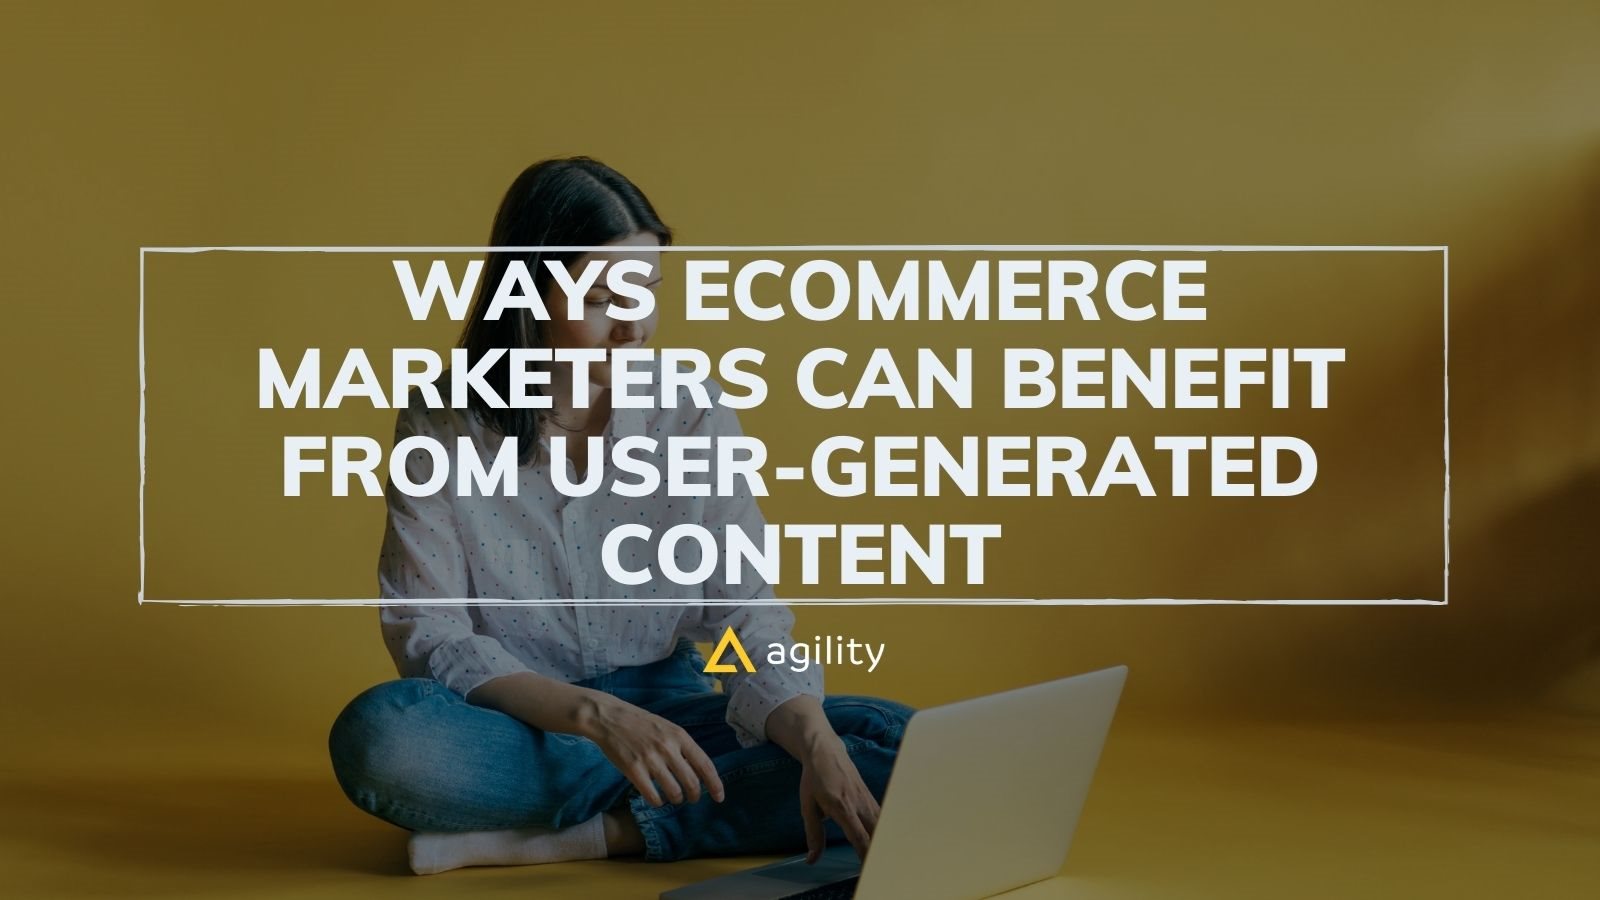 Ways eCommerce Marketers Can Benefit from User-Generated Content